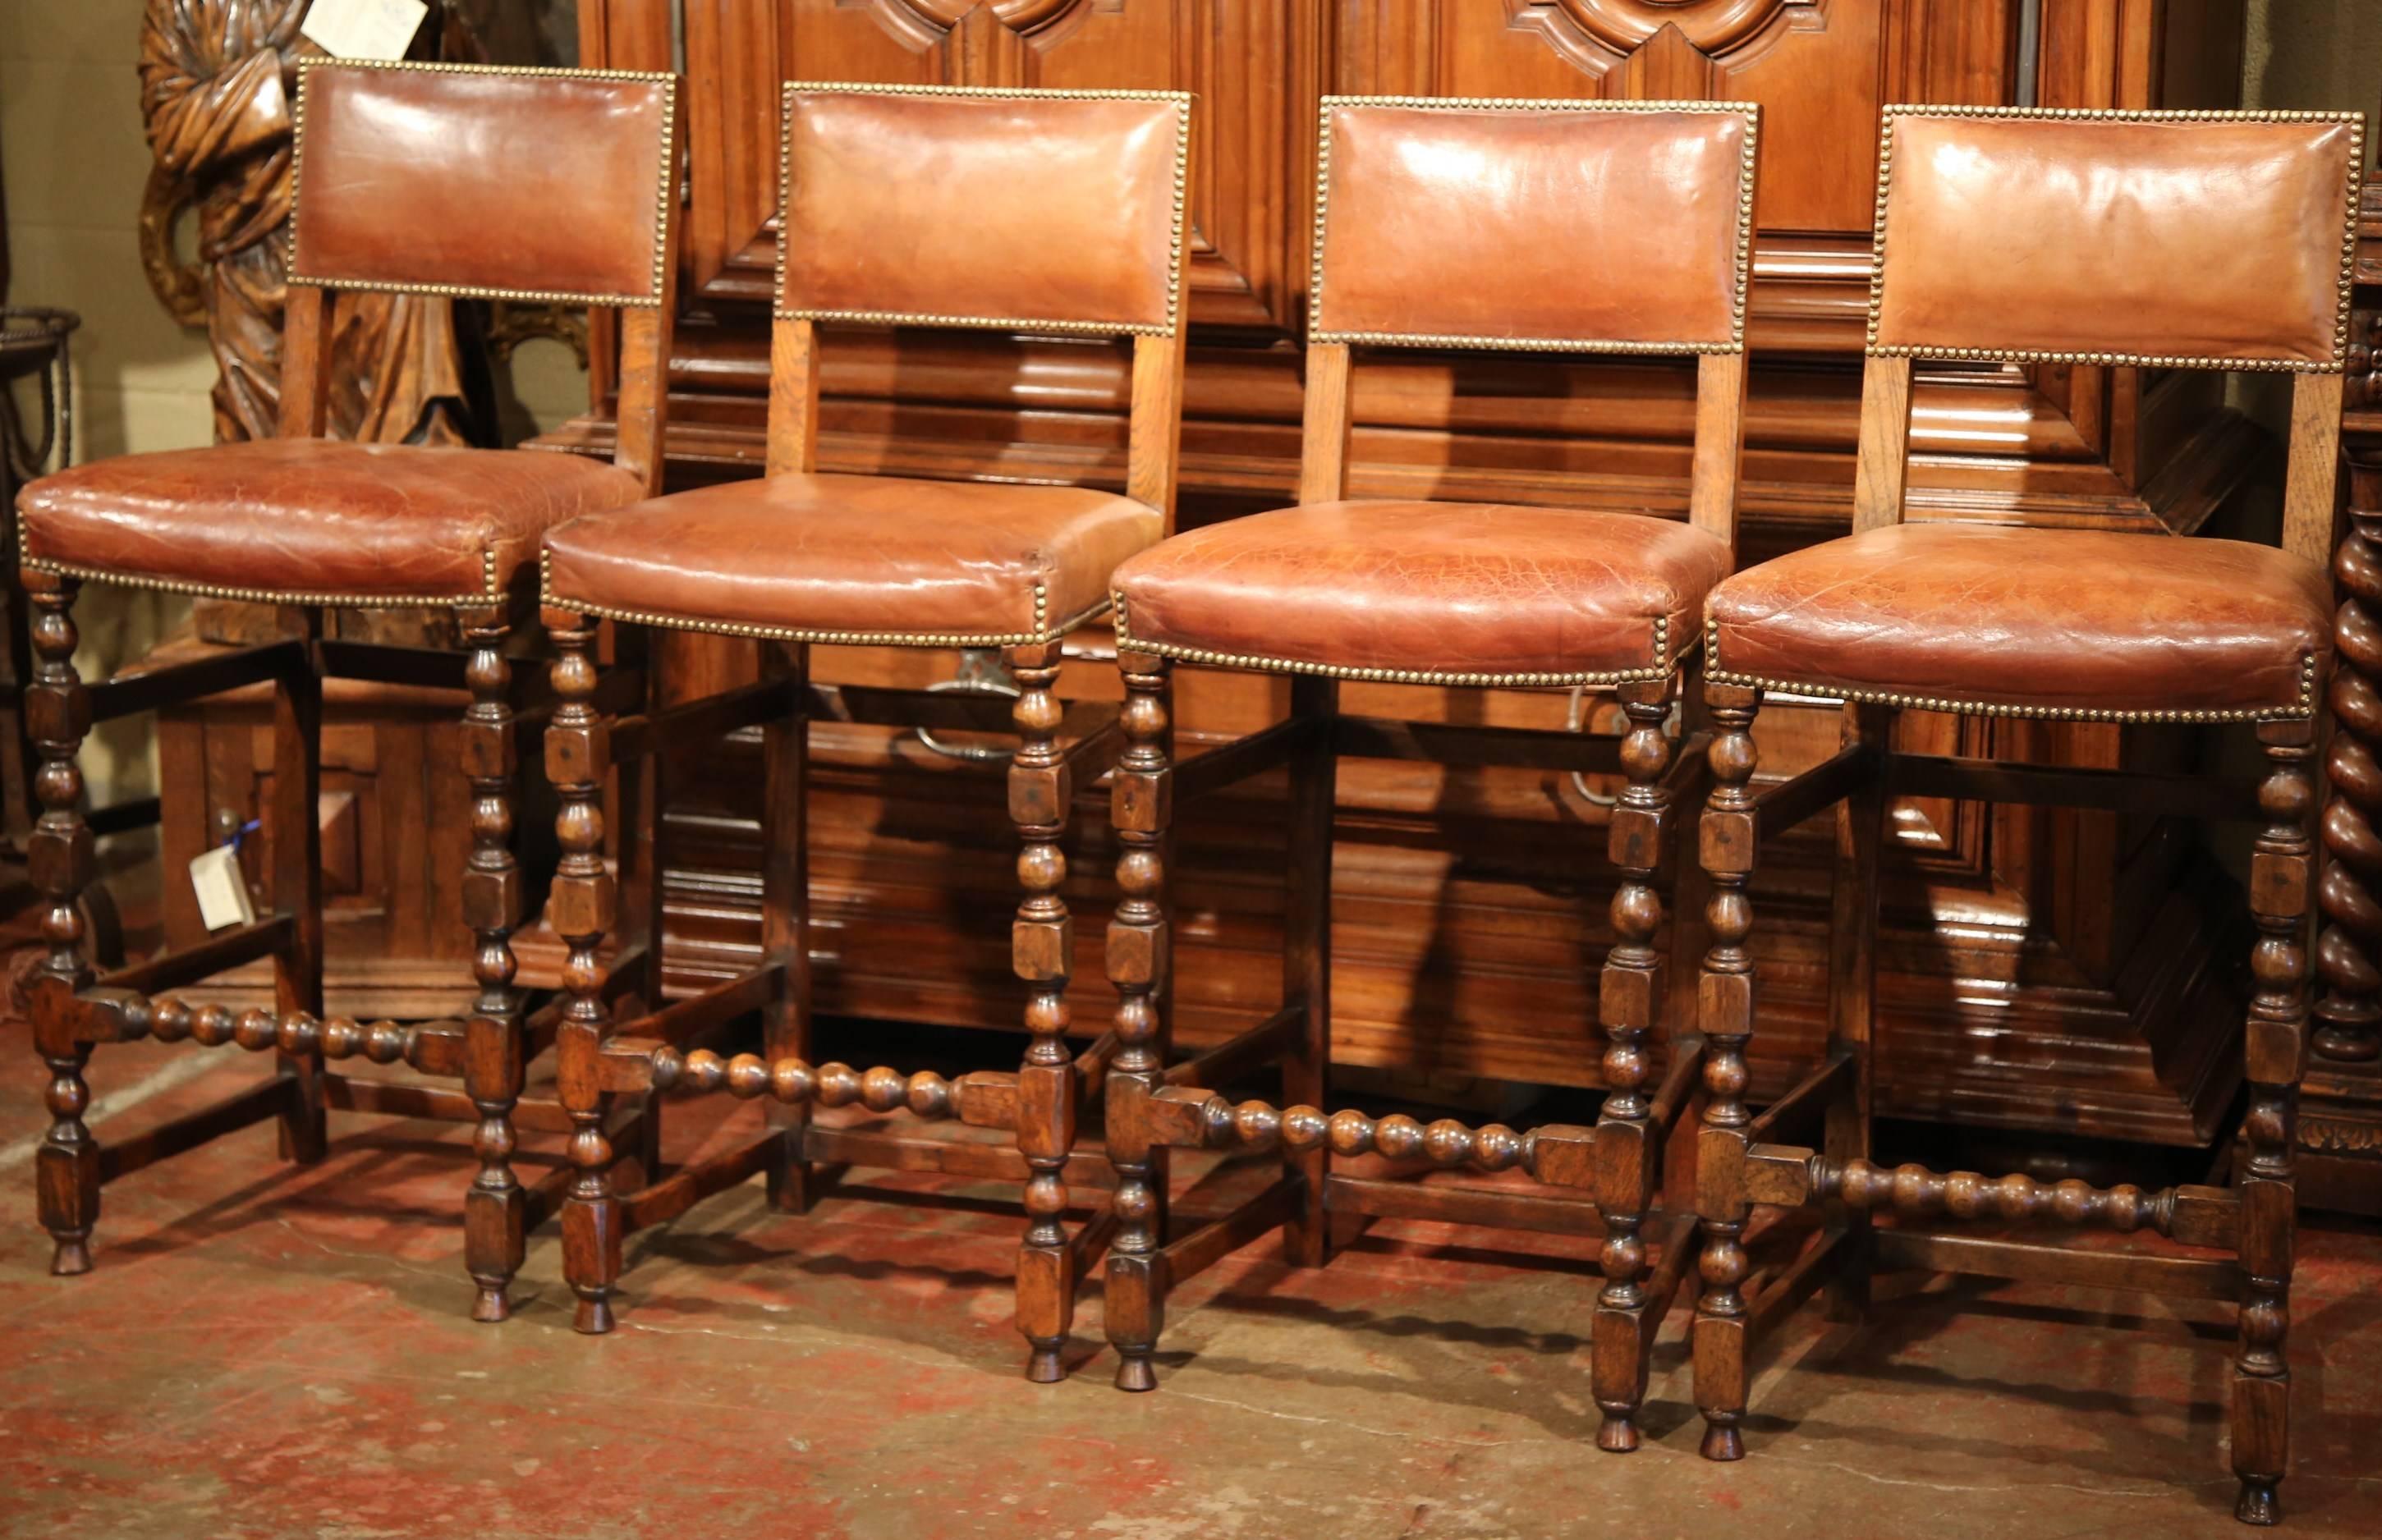 Add a Gothic look to your bar or counter with this elegant set of four antique stools. Crafted in France circa 1870, the high chairs are the perfect height for a 42 to 45